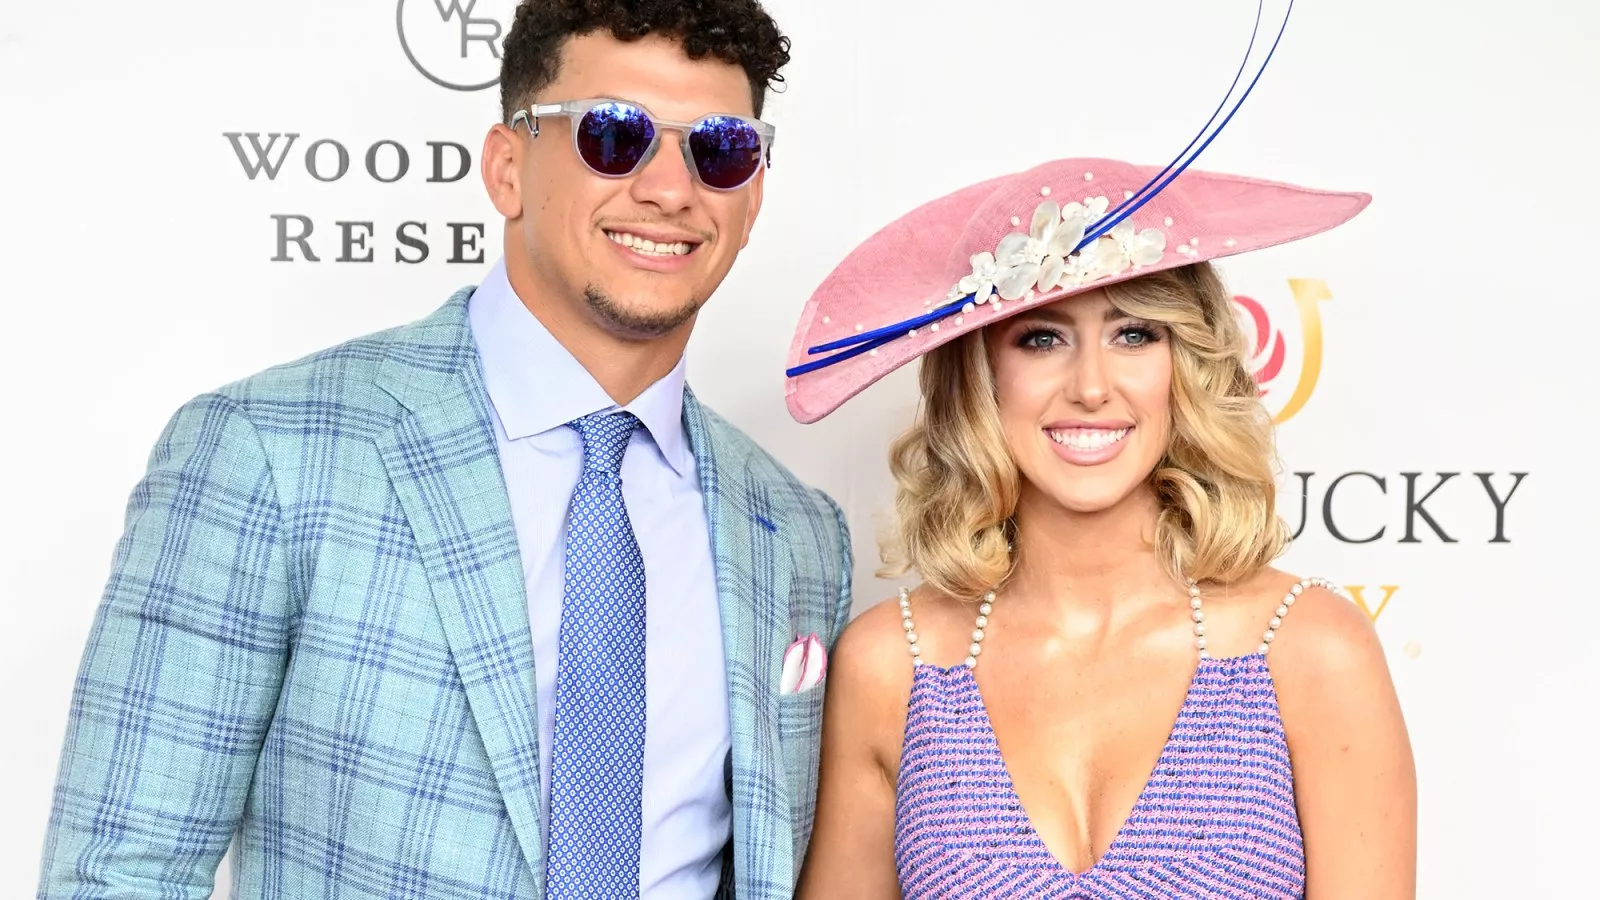 Patrick Mahomes, Wife Brittany's Kentucky Derby Outfits Slammed—'Barf